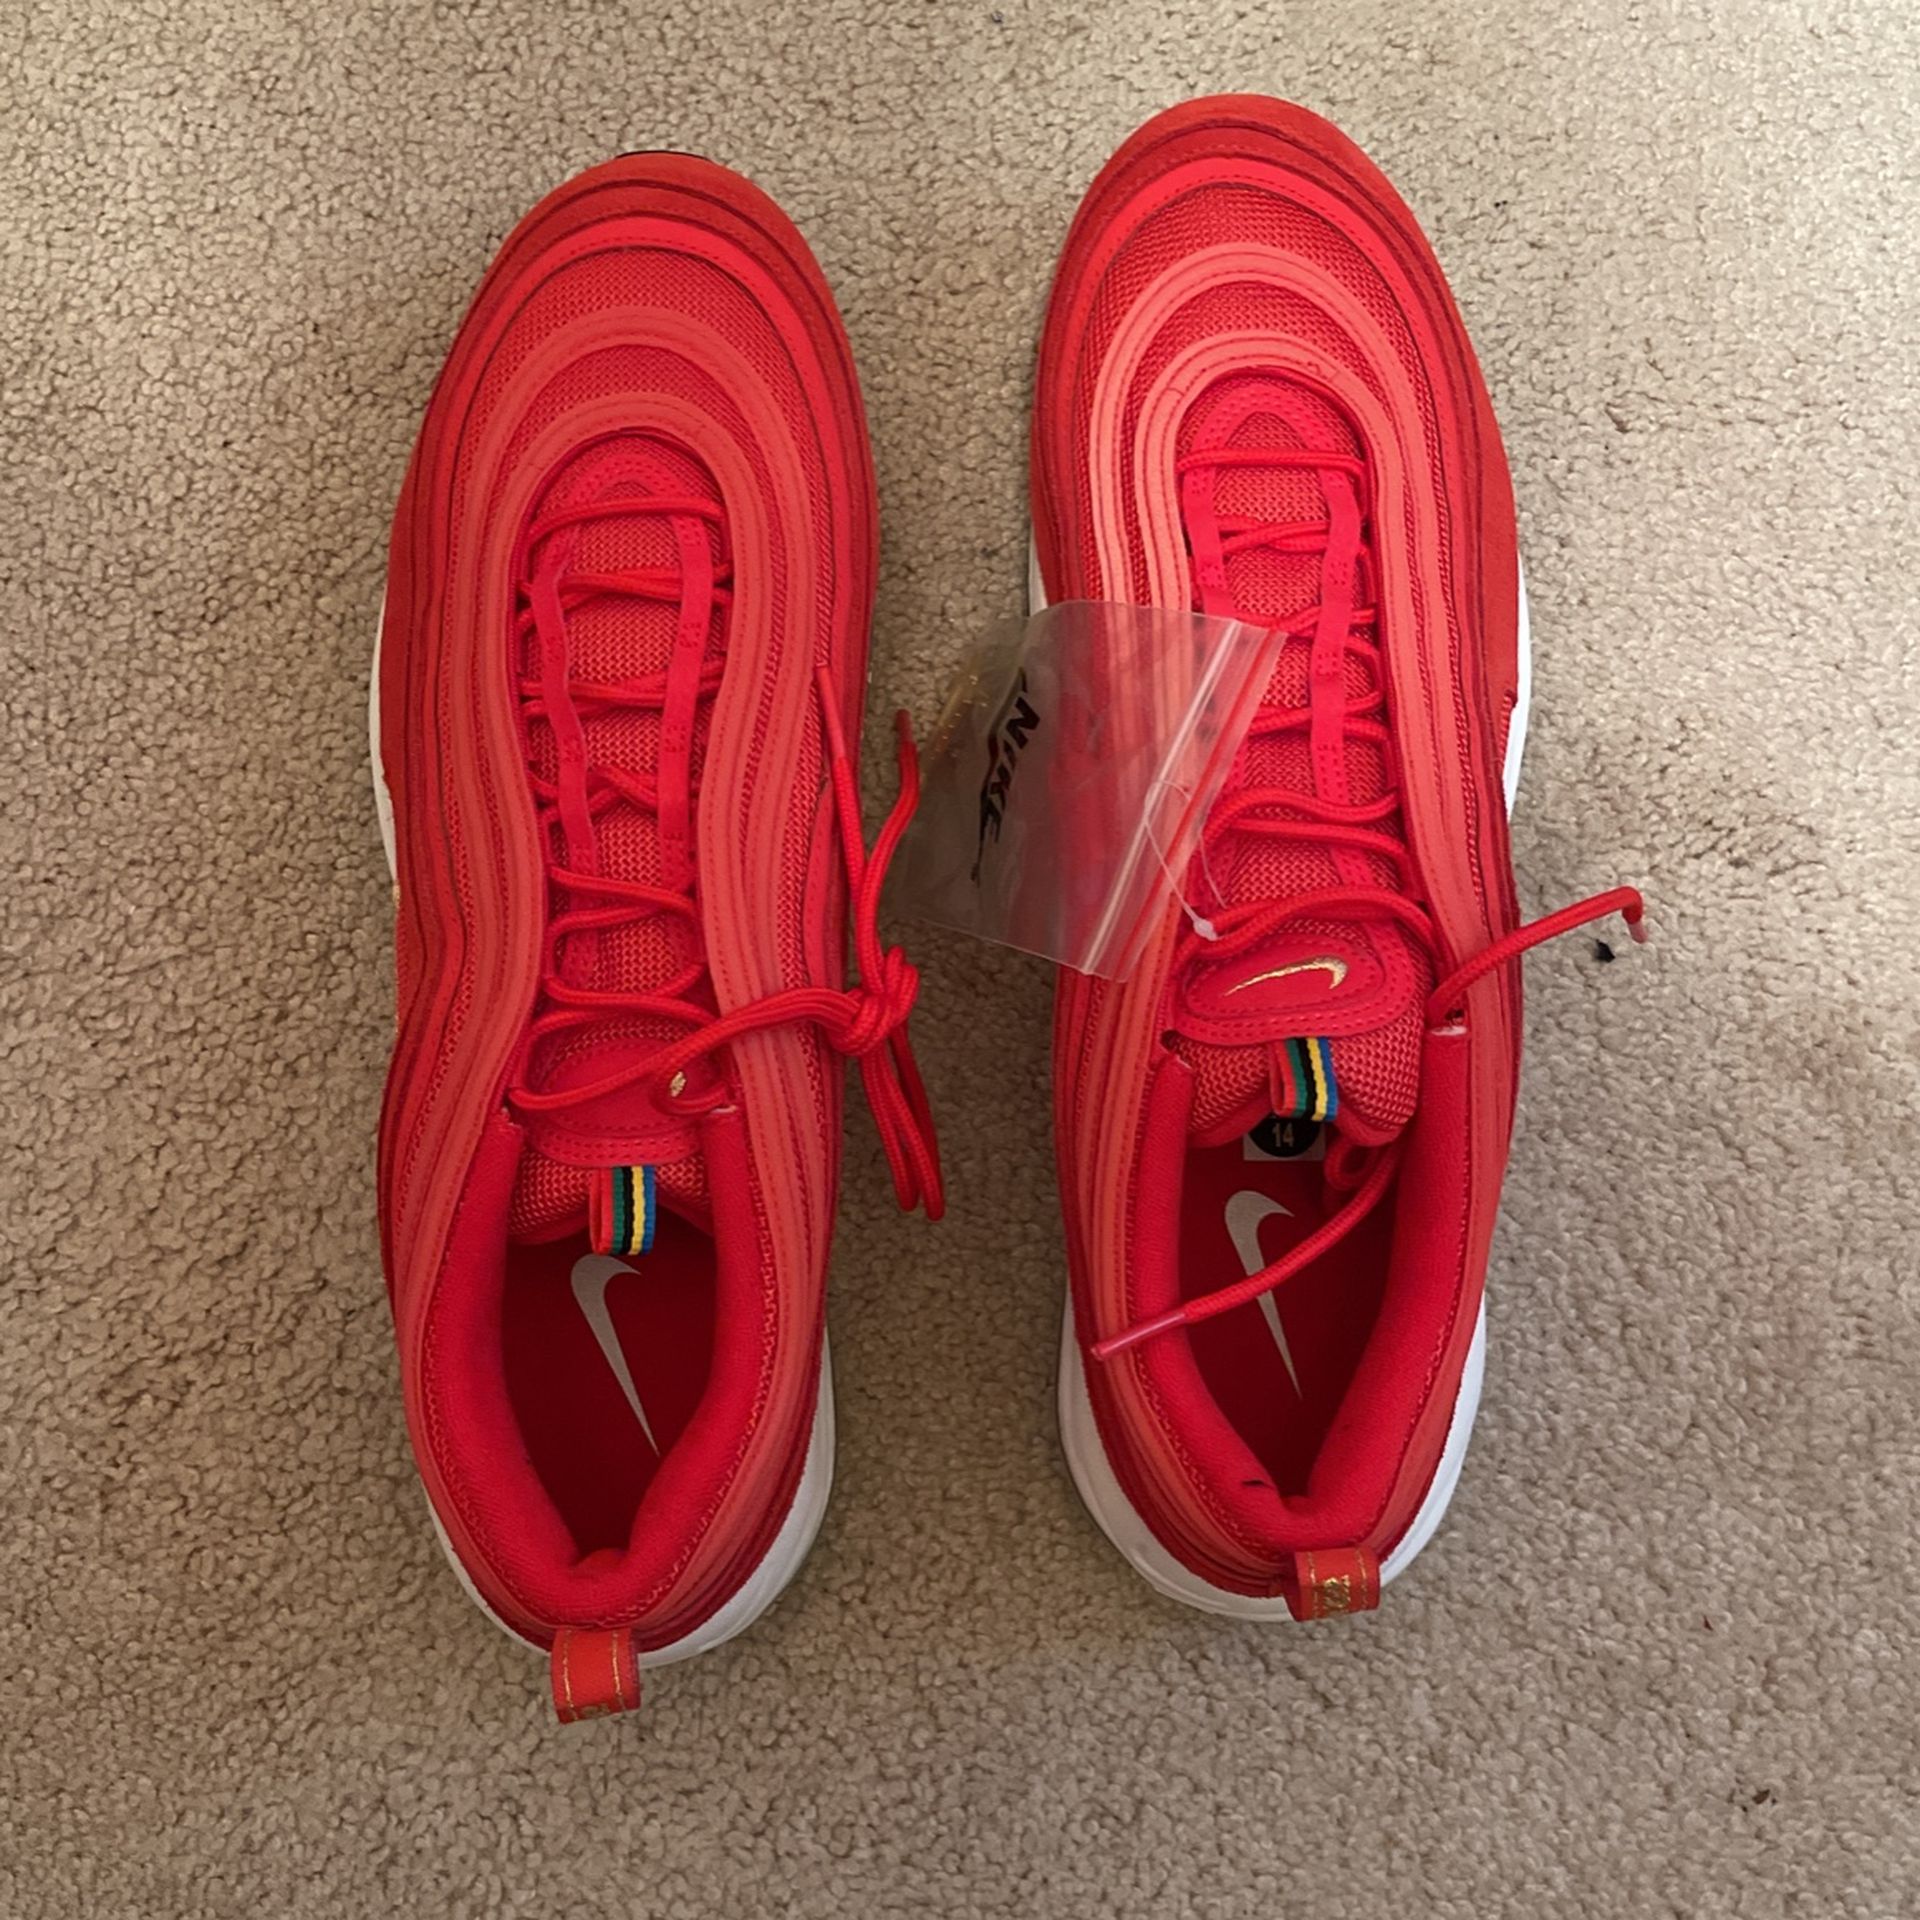 Nike Nike Air Max 97 Red Olympic Rings Size 14